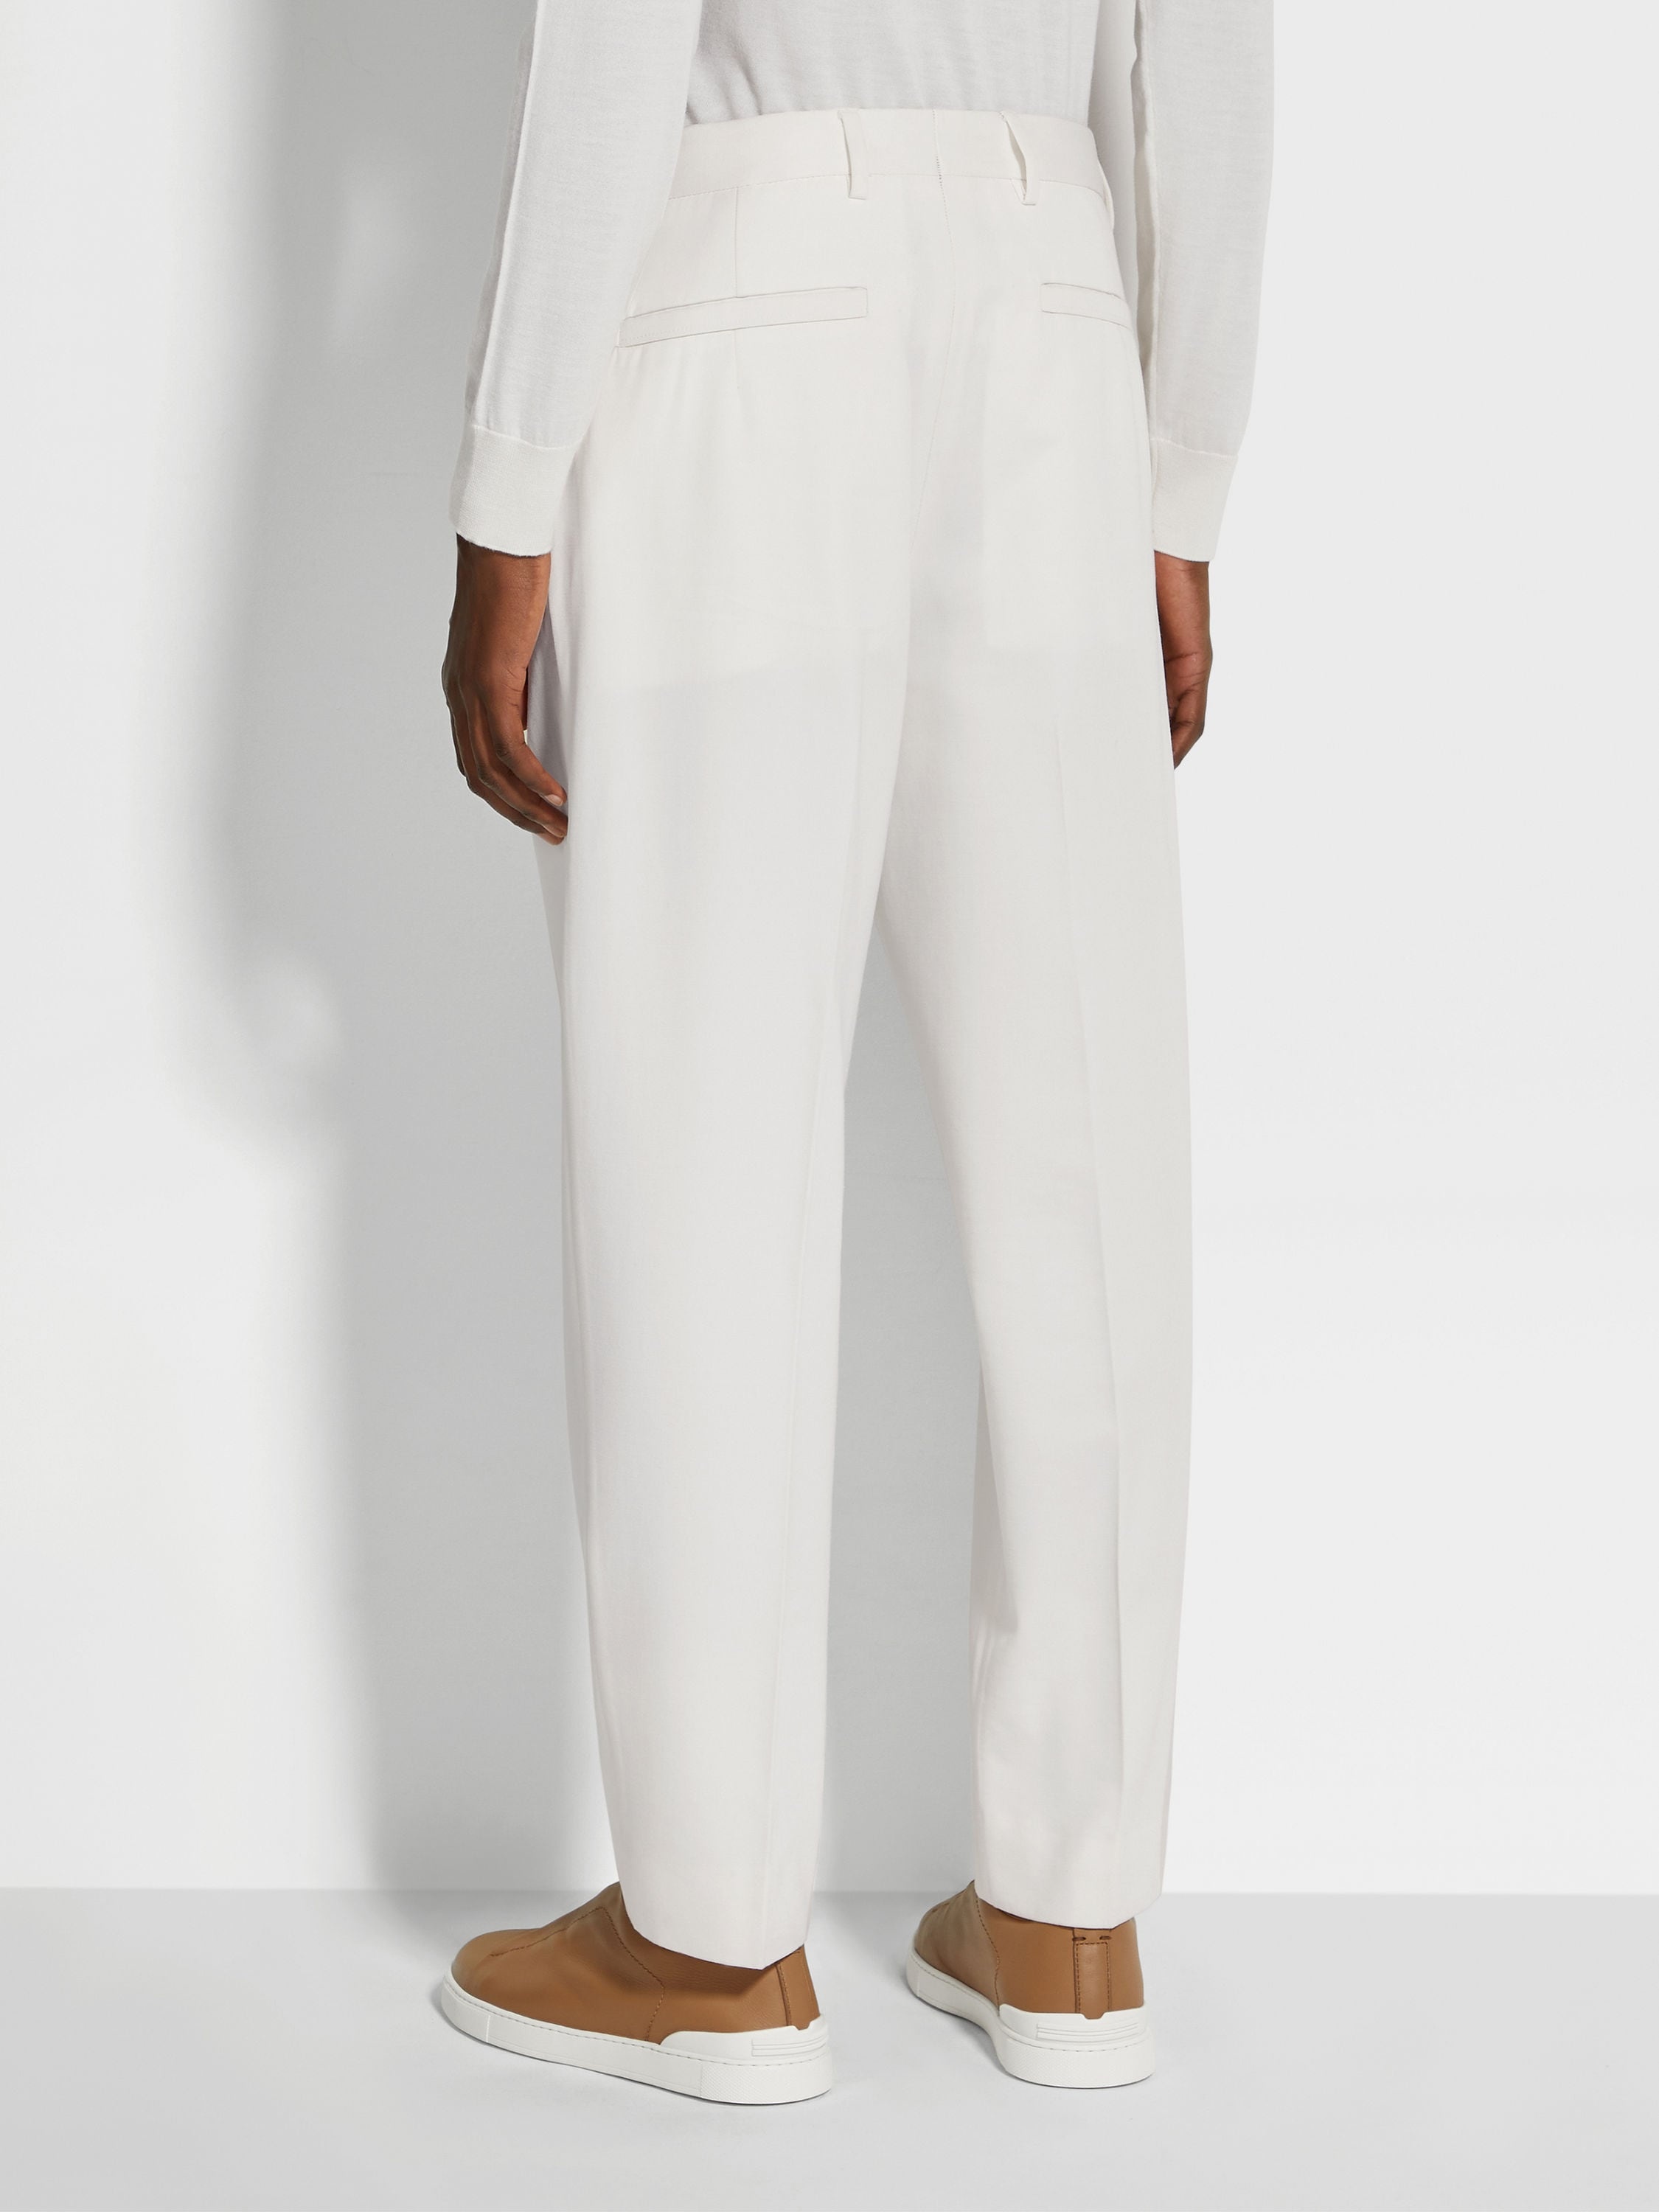 WHITE COTTON AND WOOL PANTS - 6